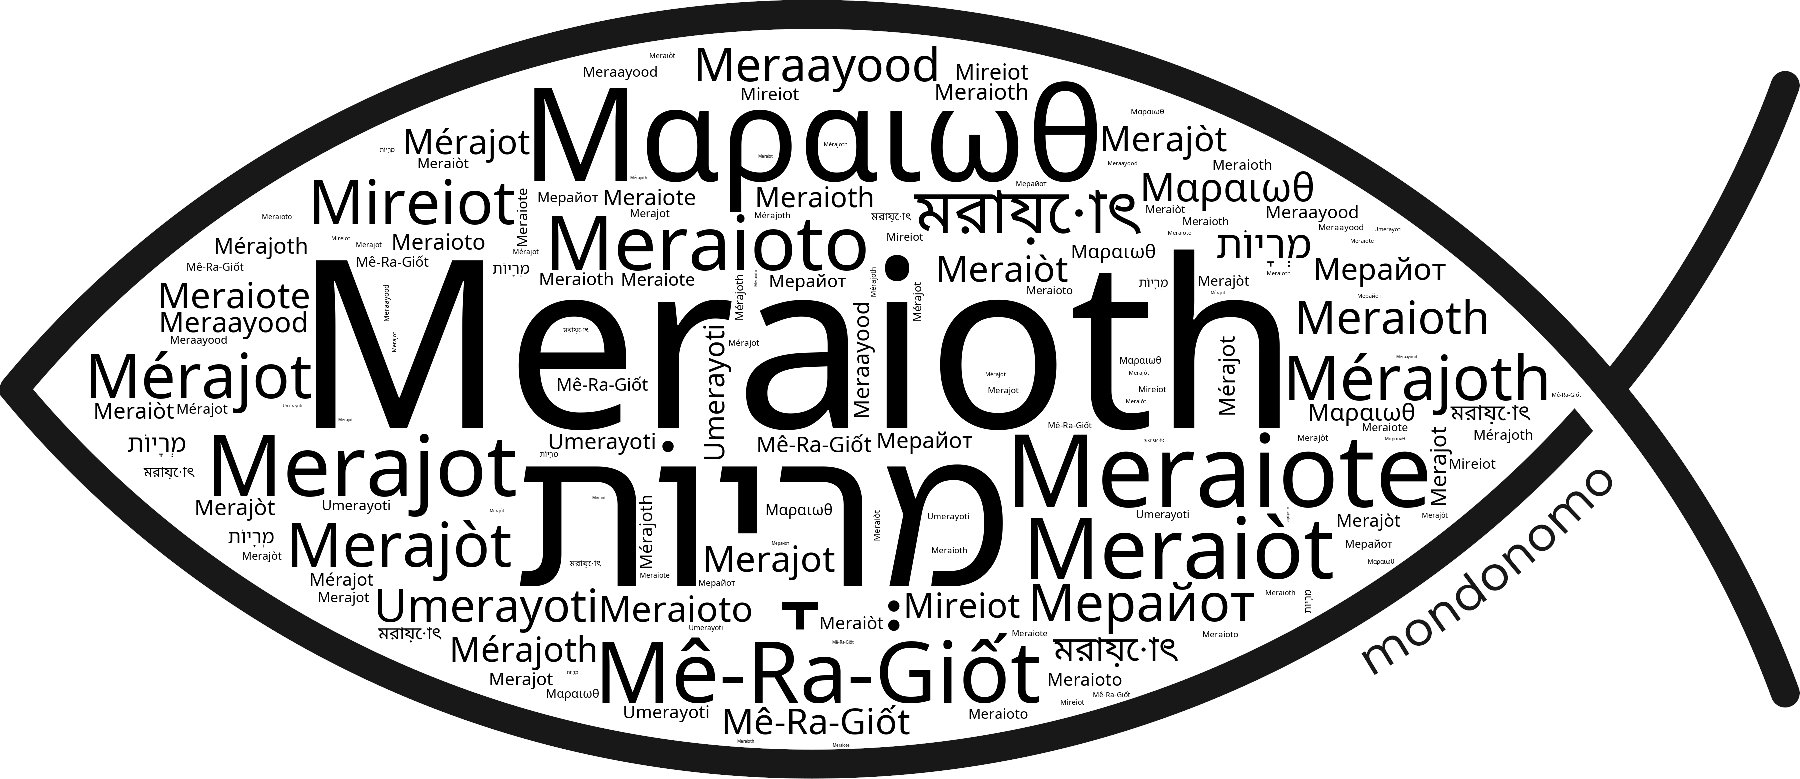 Name Meraioth in the world's Bibles